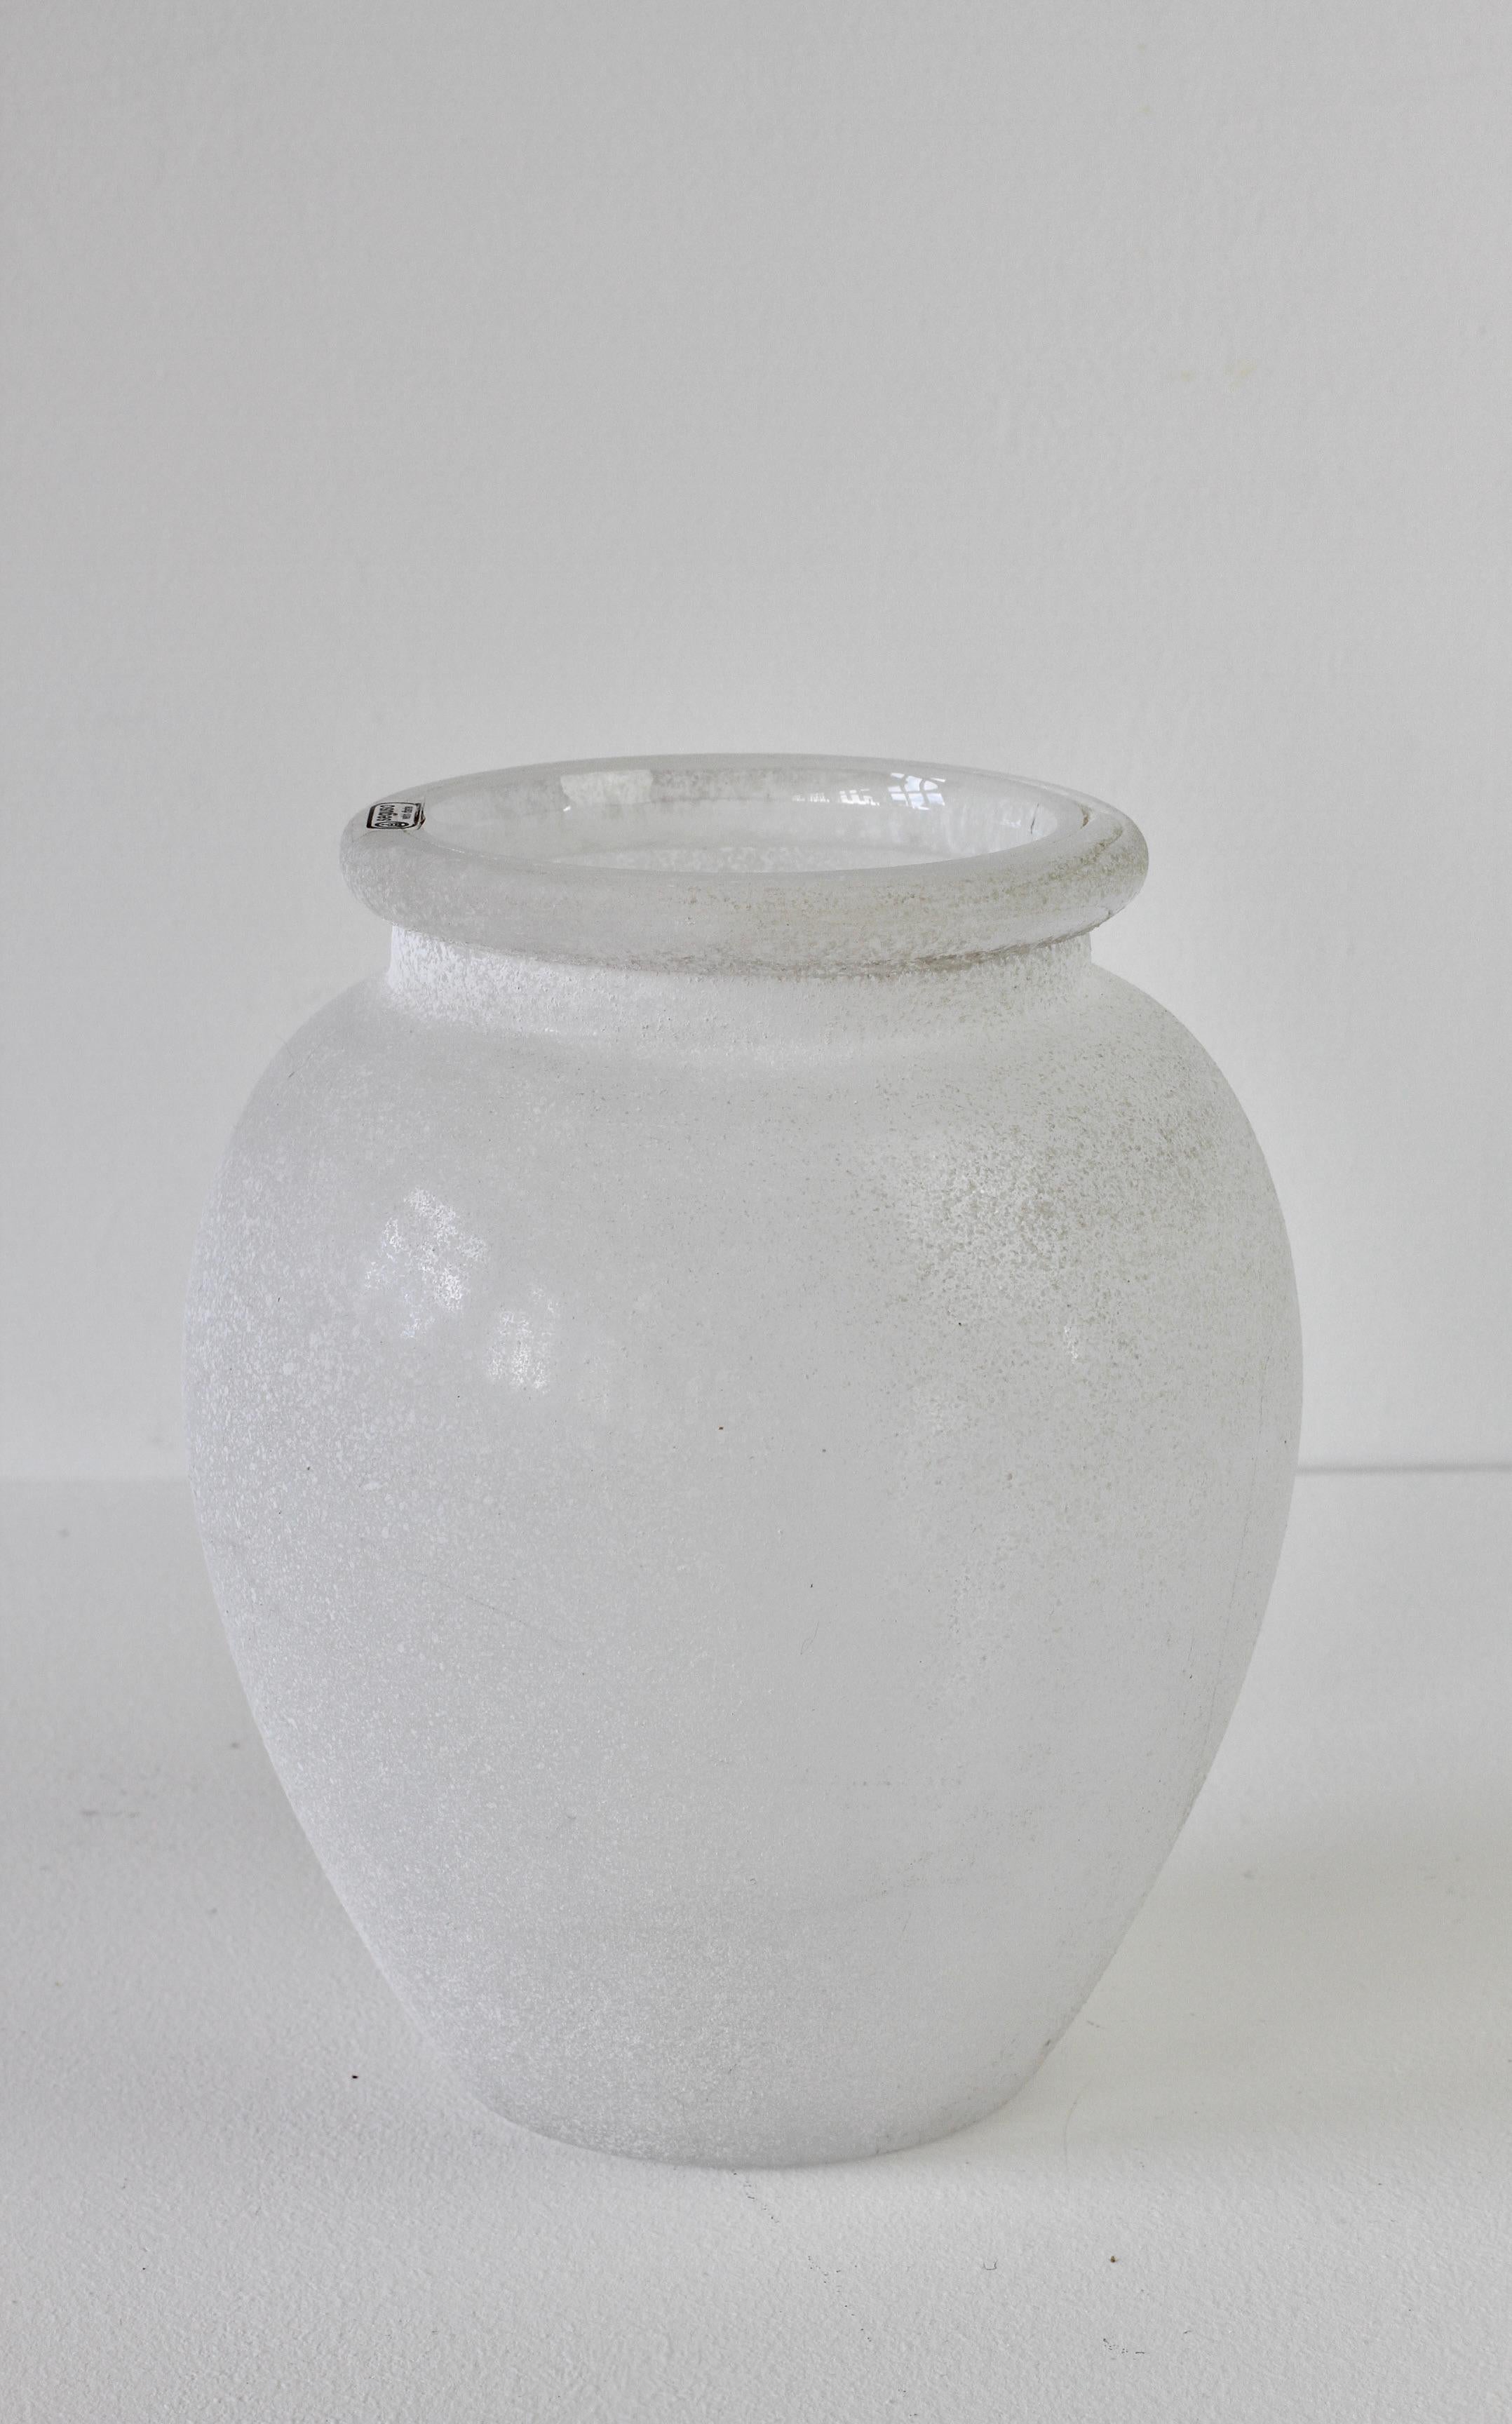 Elegant vintage Italian 8.6 inch tall 'a Scavo' white colored / coloured glass Amphora or vase by Seguso Vetri d'Arte Murano, Italy. Elegant in form and showing extraordinary craftsmanship with the use of the 'Scavo' technique to replicate to look